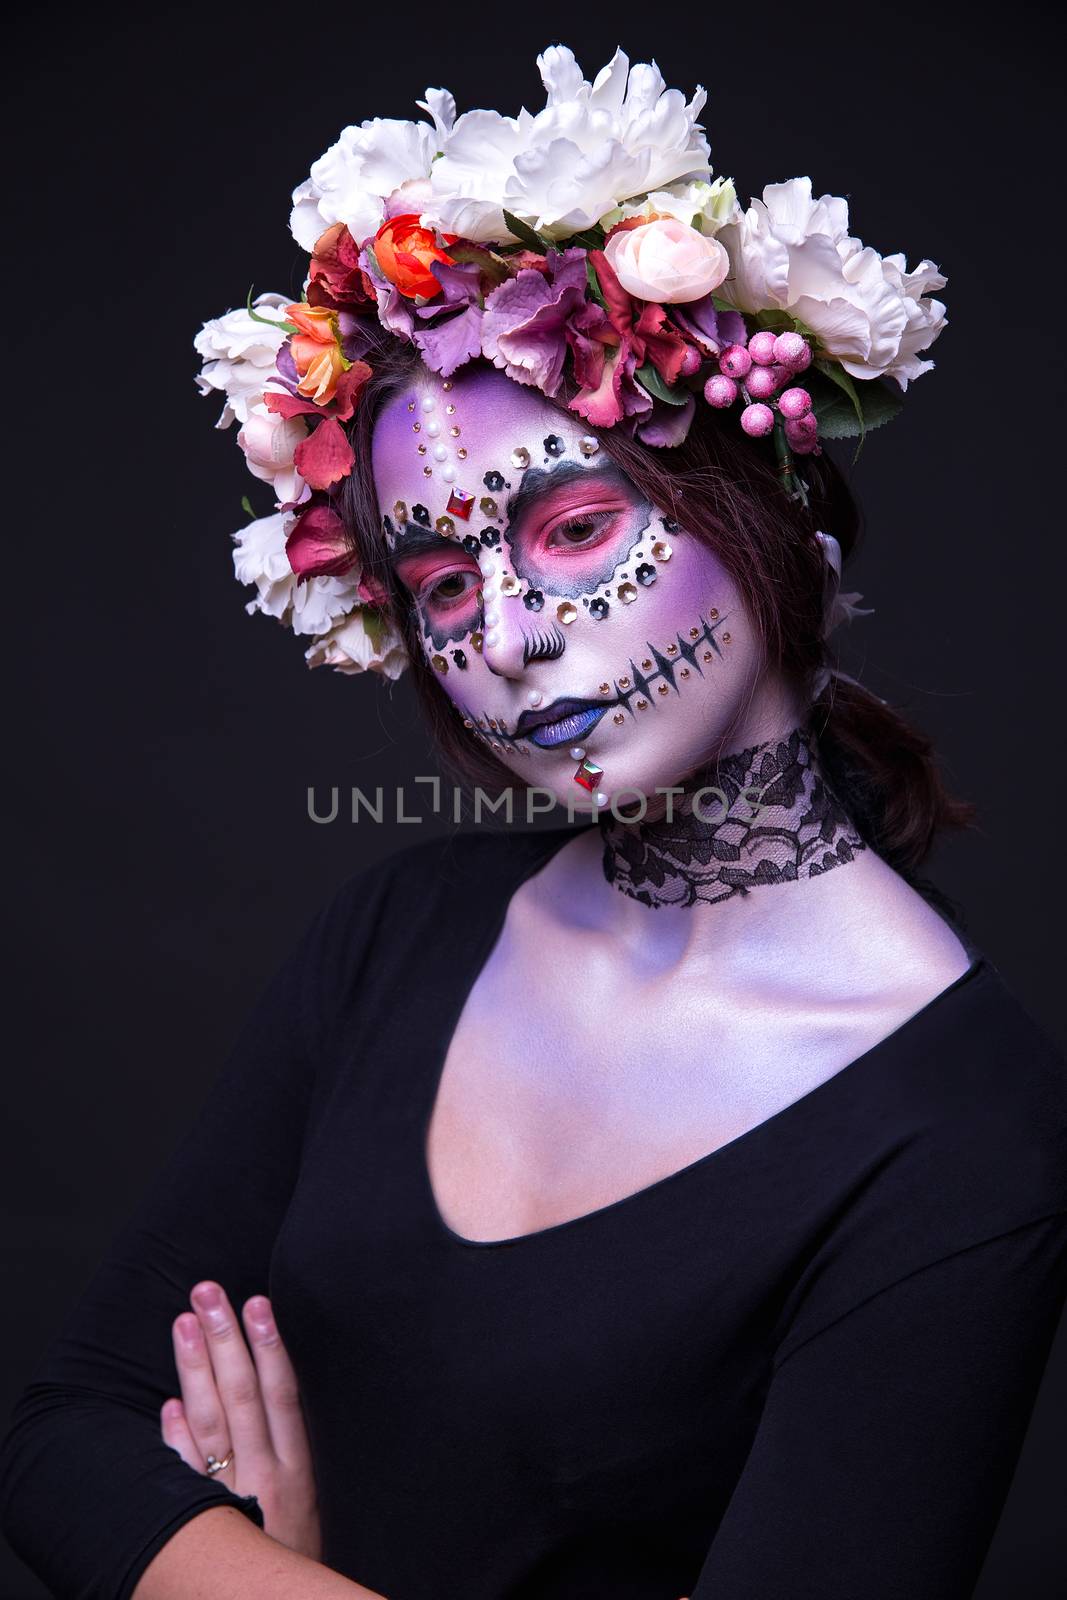 Makeup with Rhinestones and Wreath of Flowers Halloween theme by Multipedia